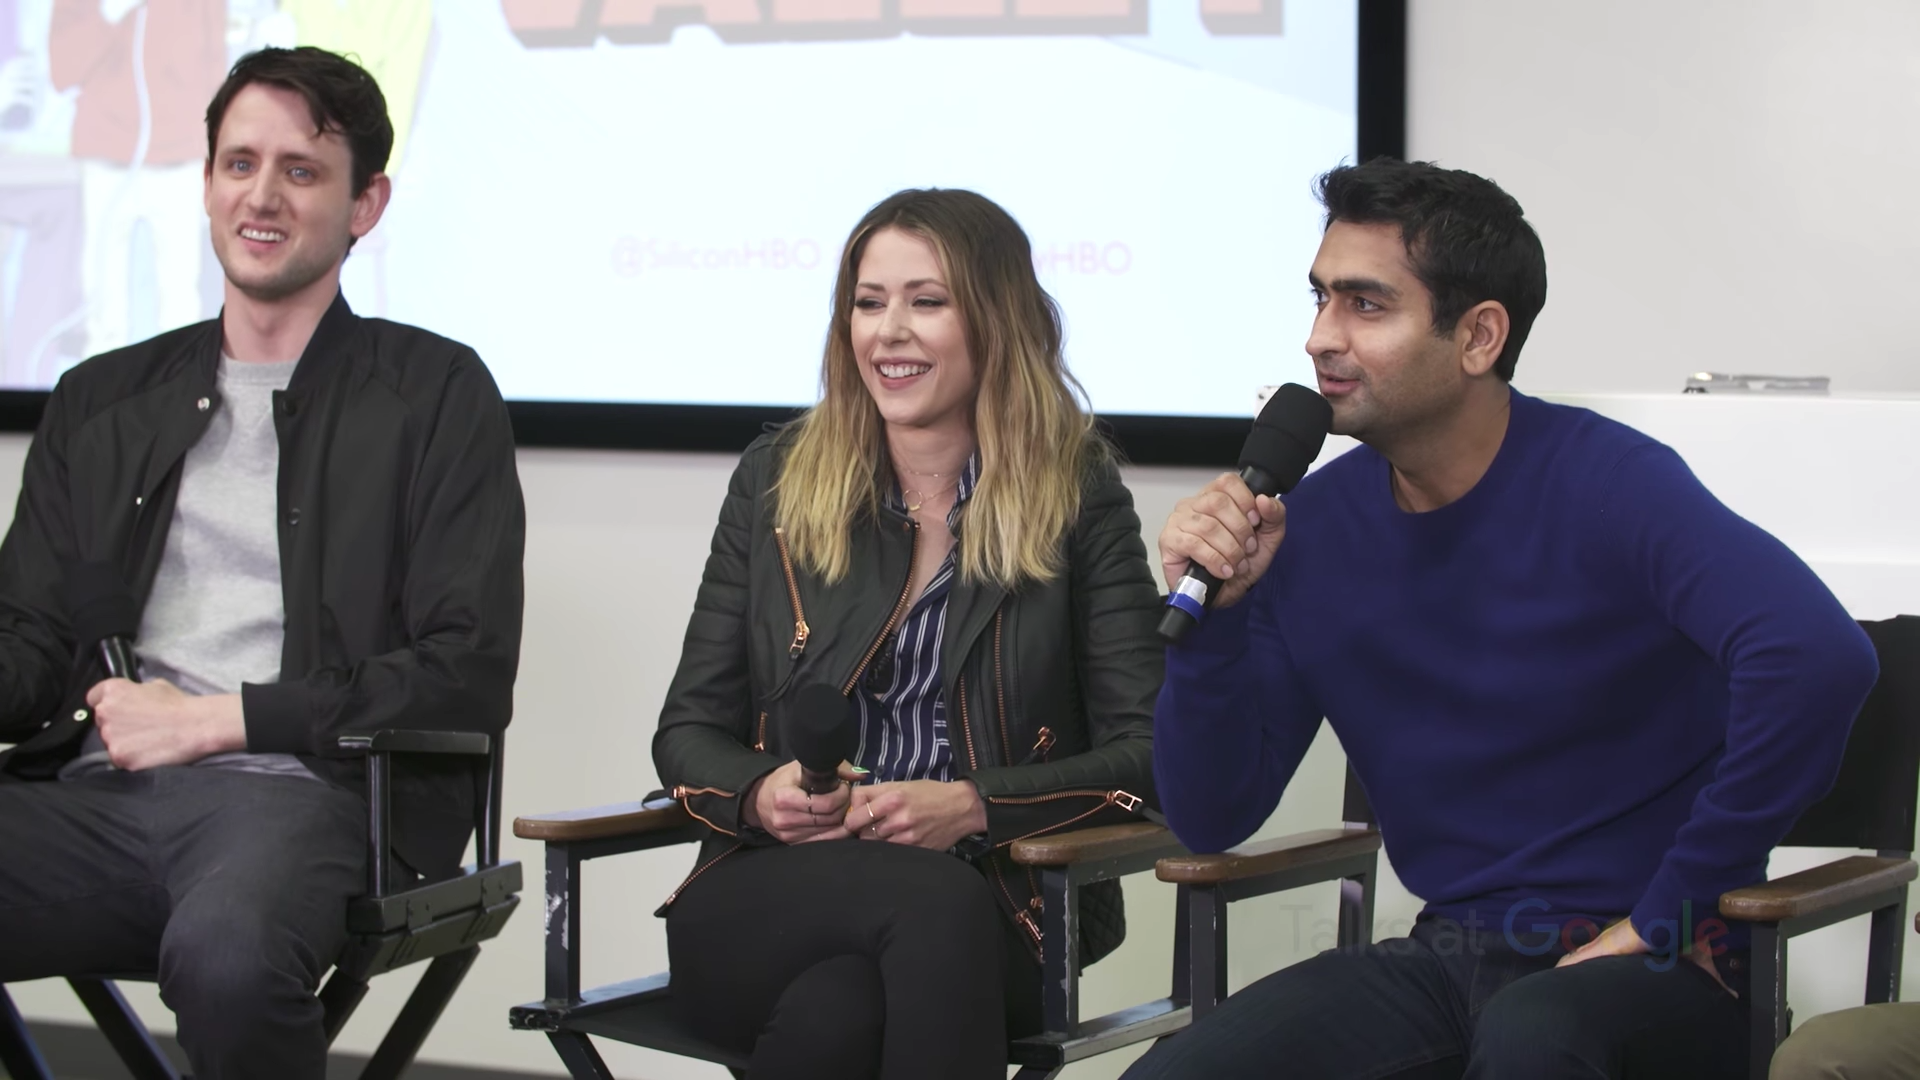 Cast from HBO's Silicon Valley with Talks at Google. Photo by: Talks at Google / YouTube